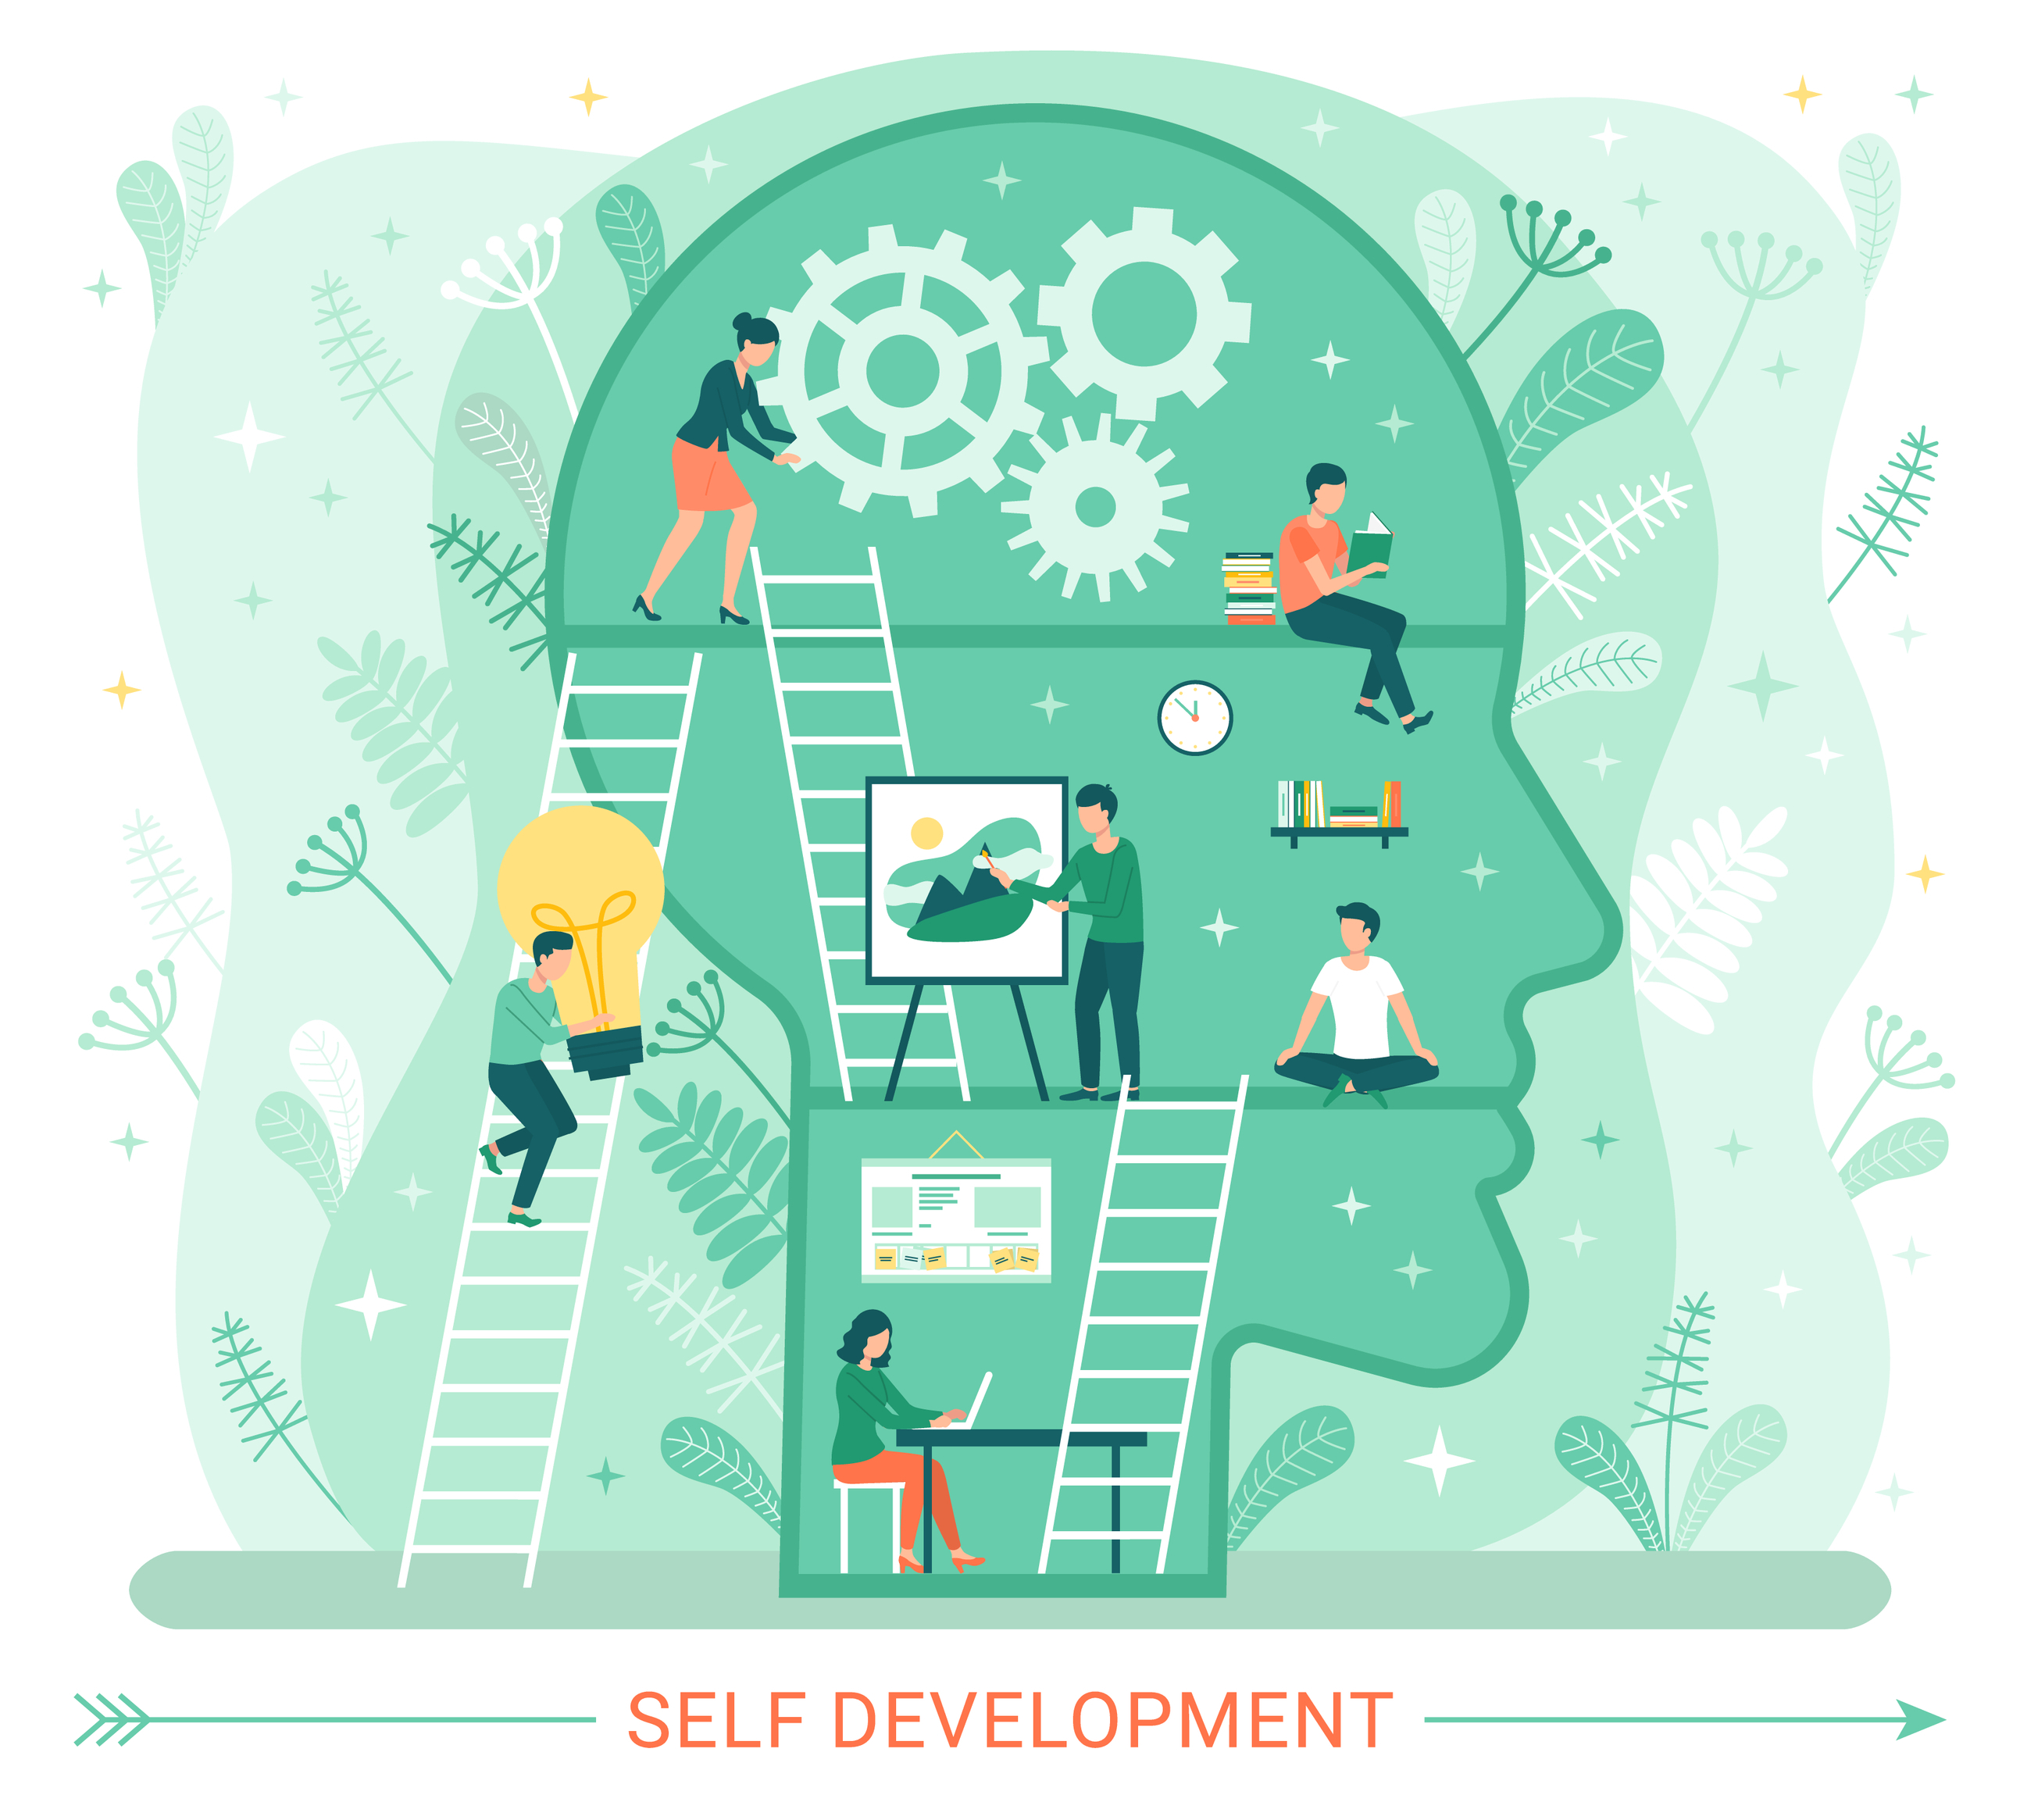 Illustrated image of person's head showing self development via people working, relaxing, painting and reading